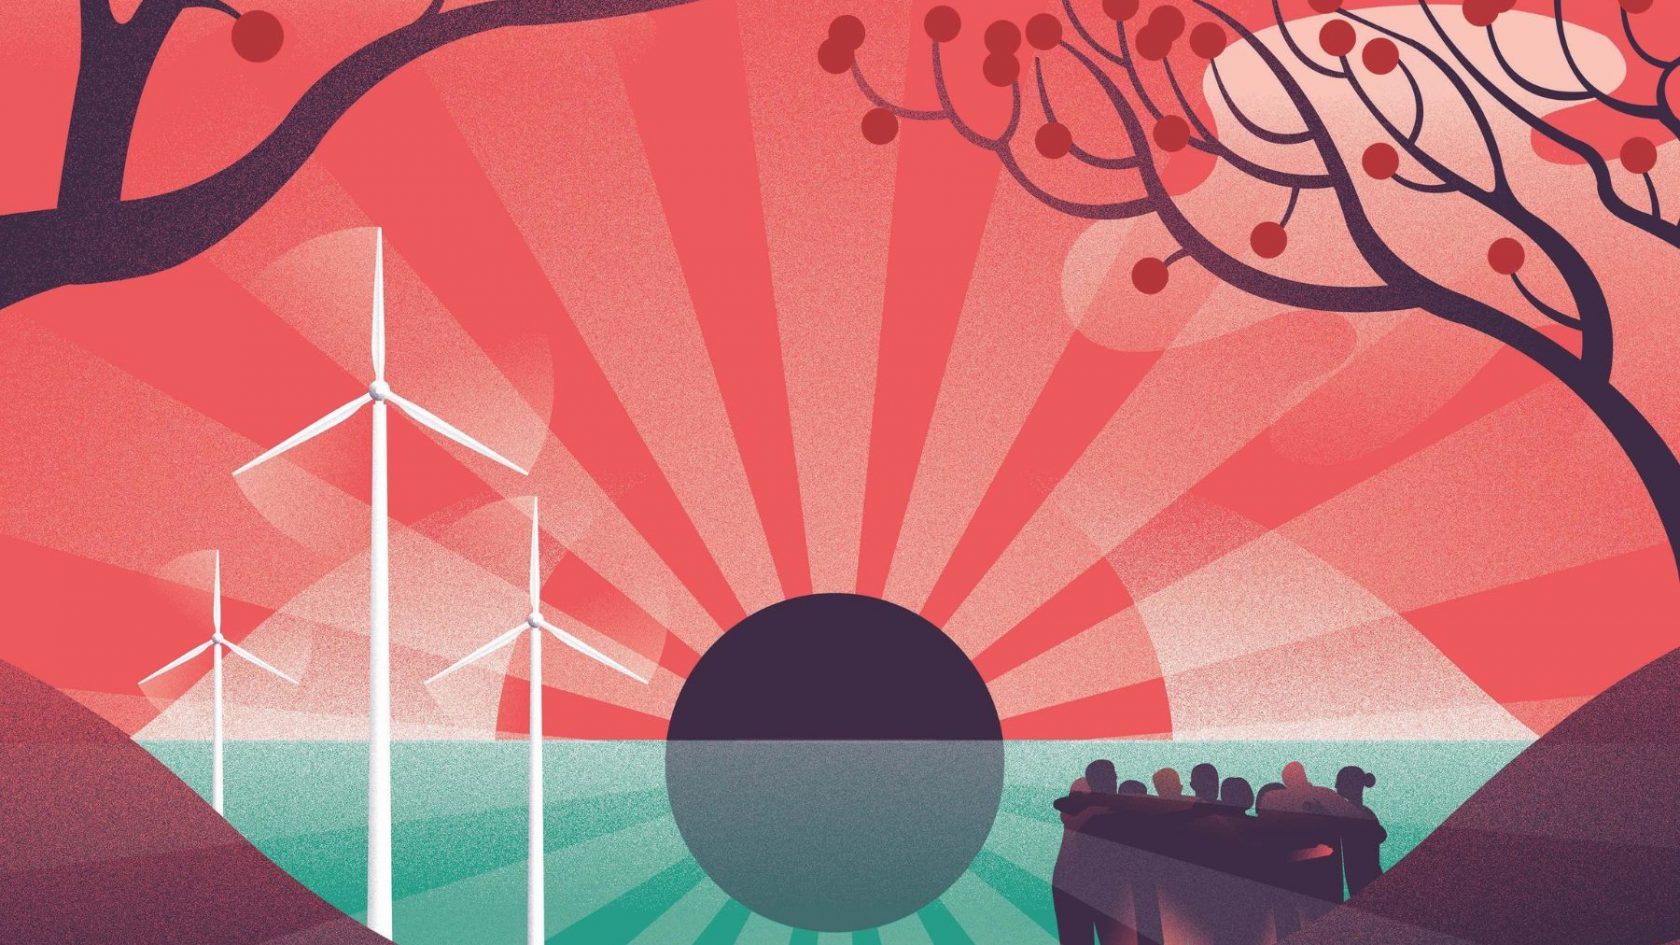 illustration shows a group of people hugging next to a design of a giant sun rising over the horizon, with trees in the background